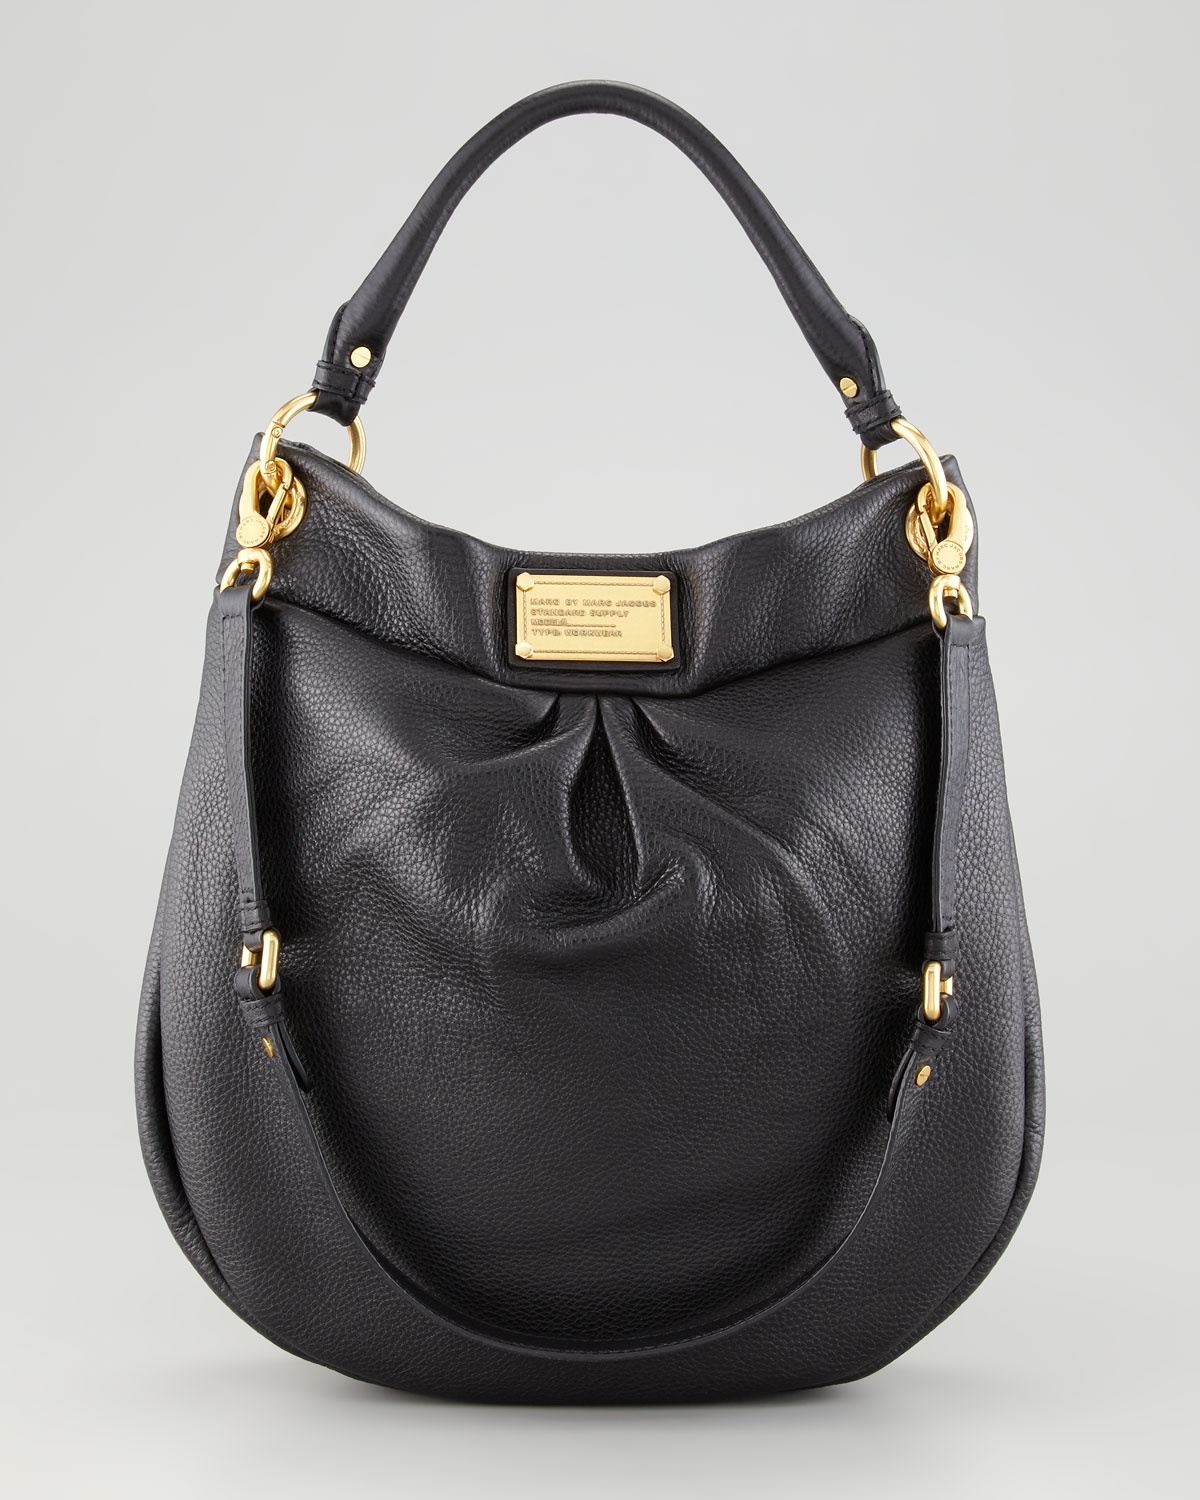 Marc by marc jacobs Classic Q Hillier Hobo Bag Black in Black | Lyst